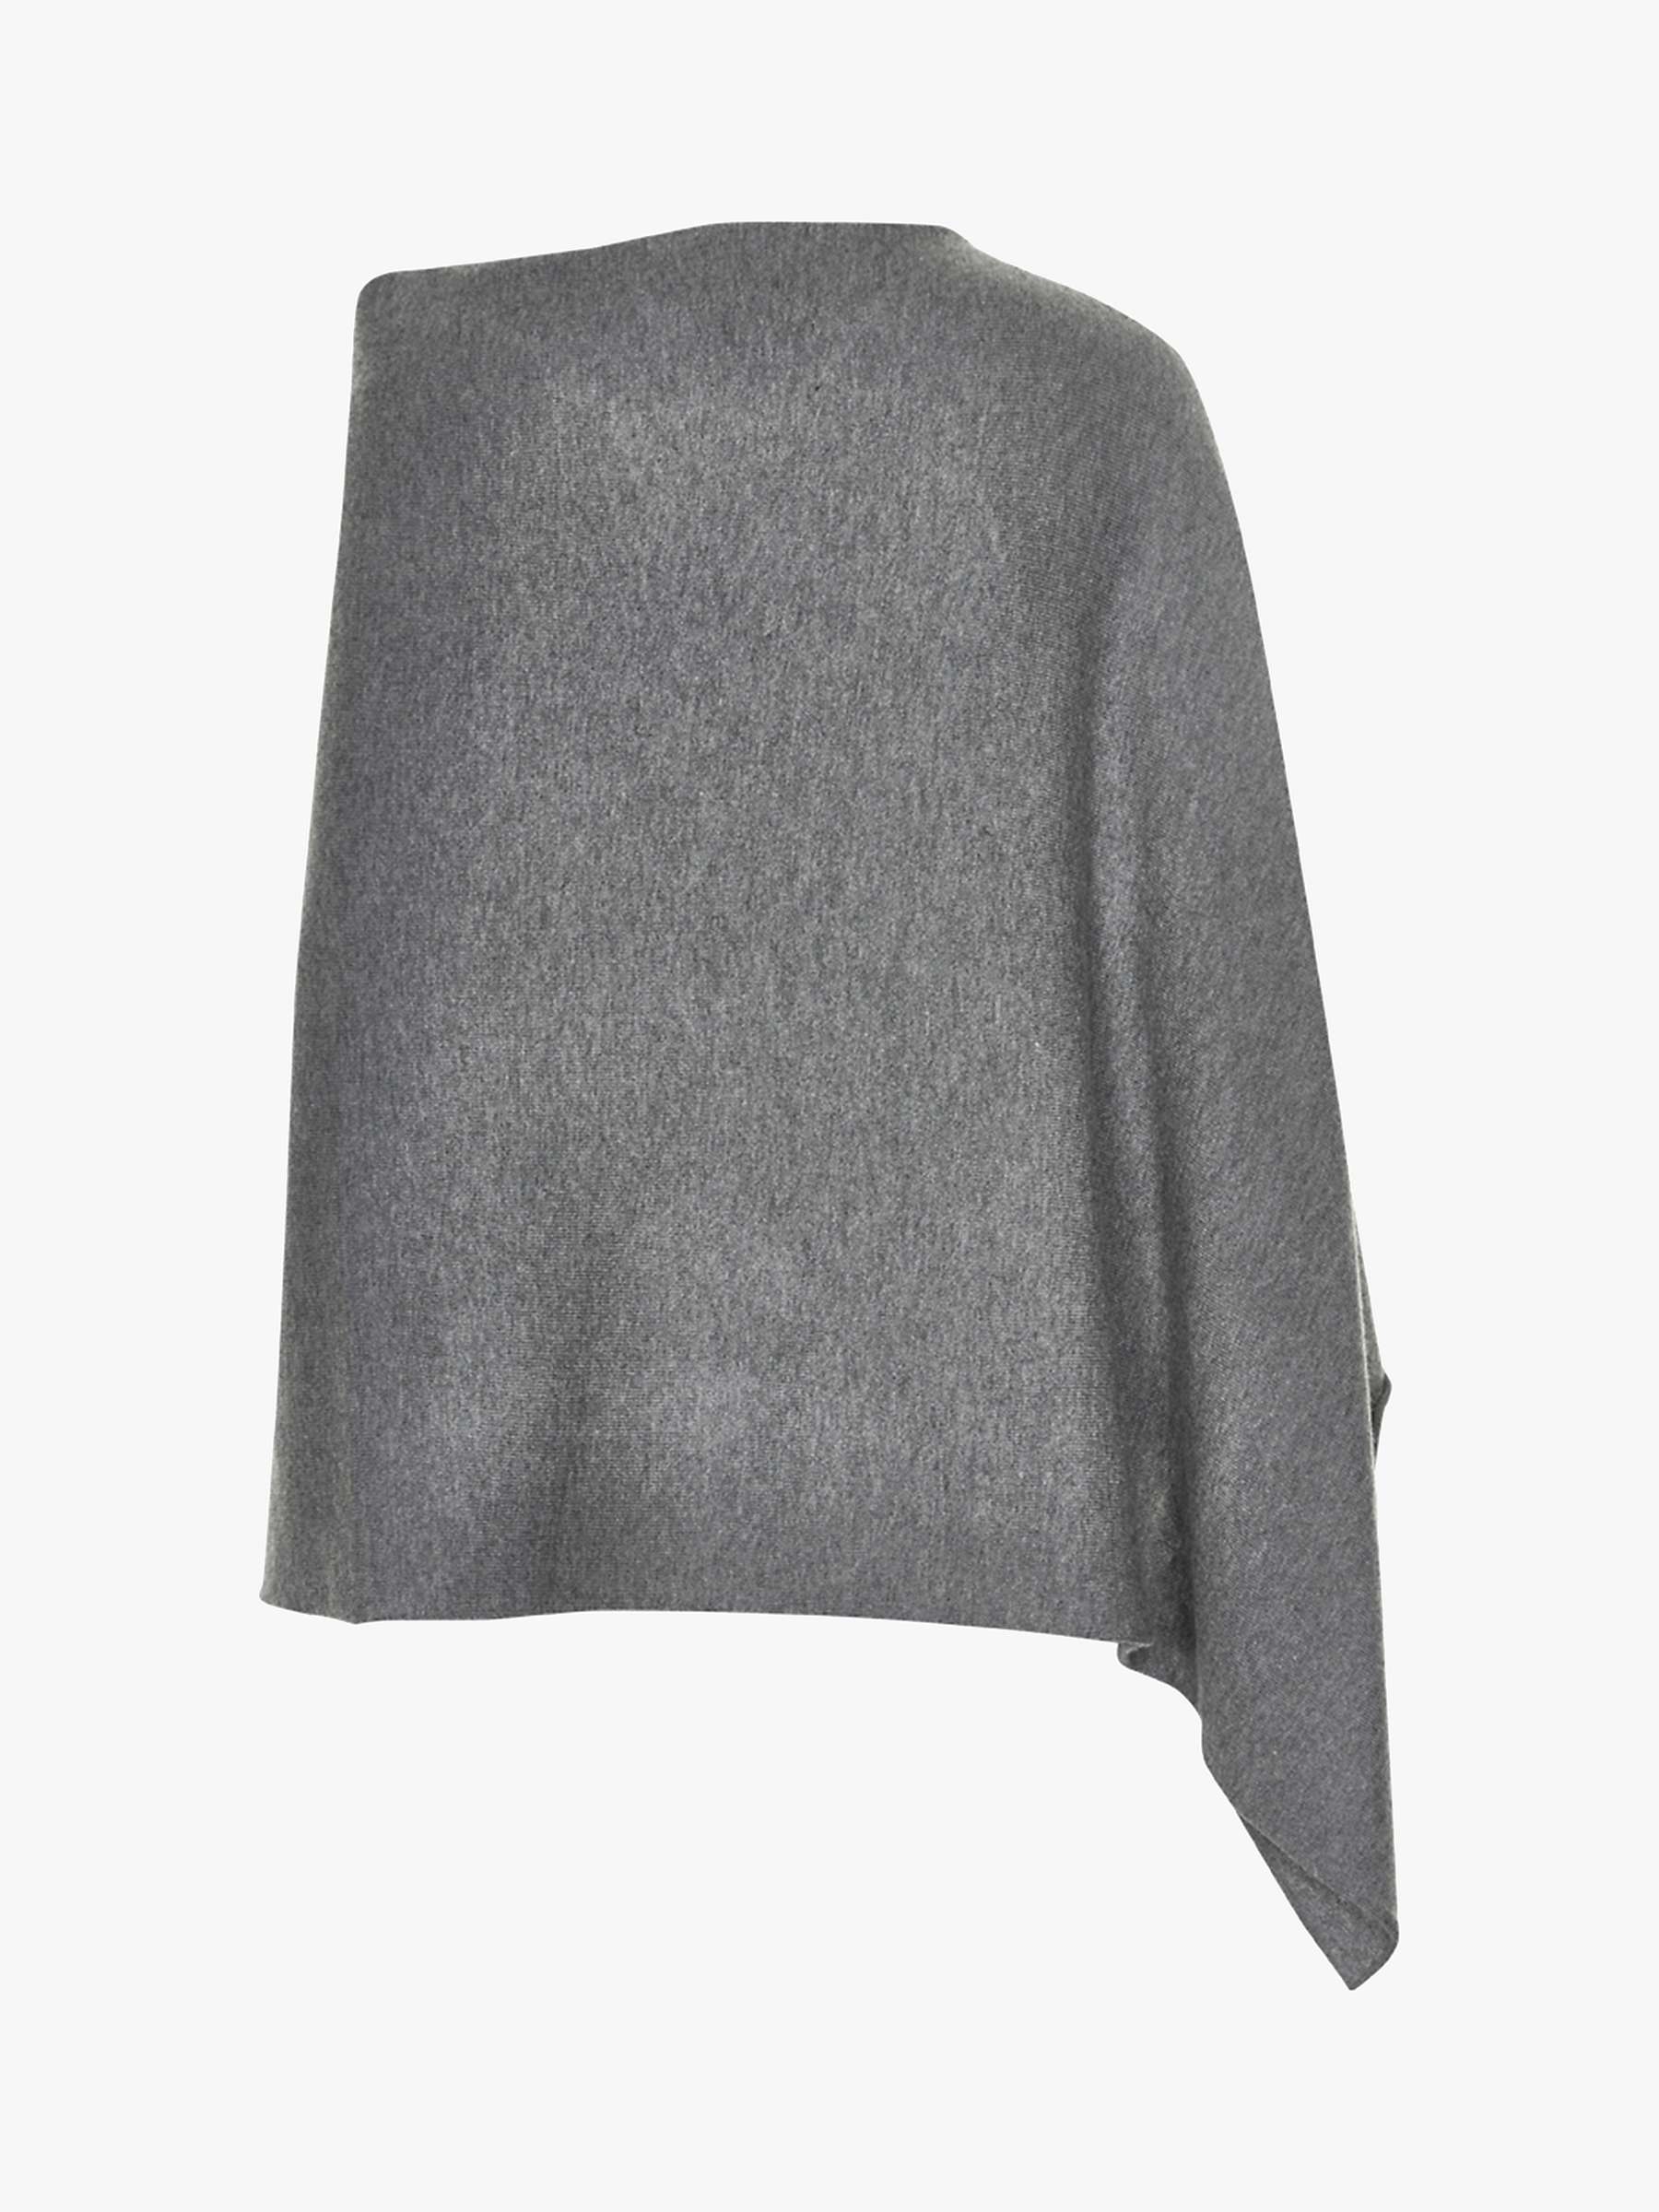 Buy Part Two Kristanna Cashmere Blend Asymmetrical Poncho Online at johnlewis.com